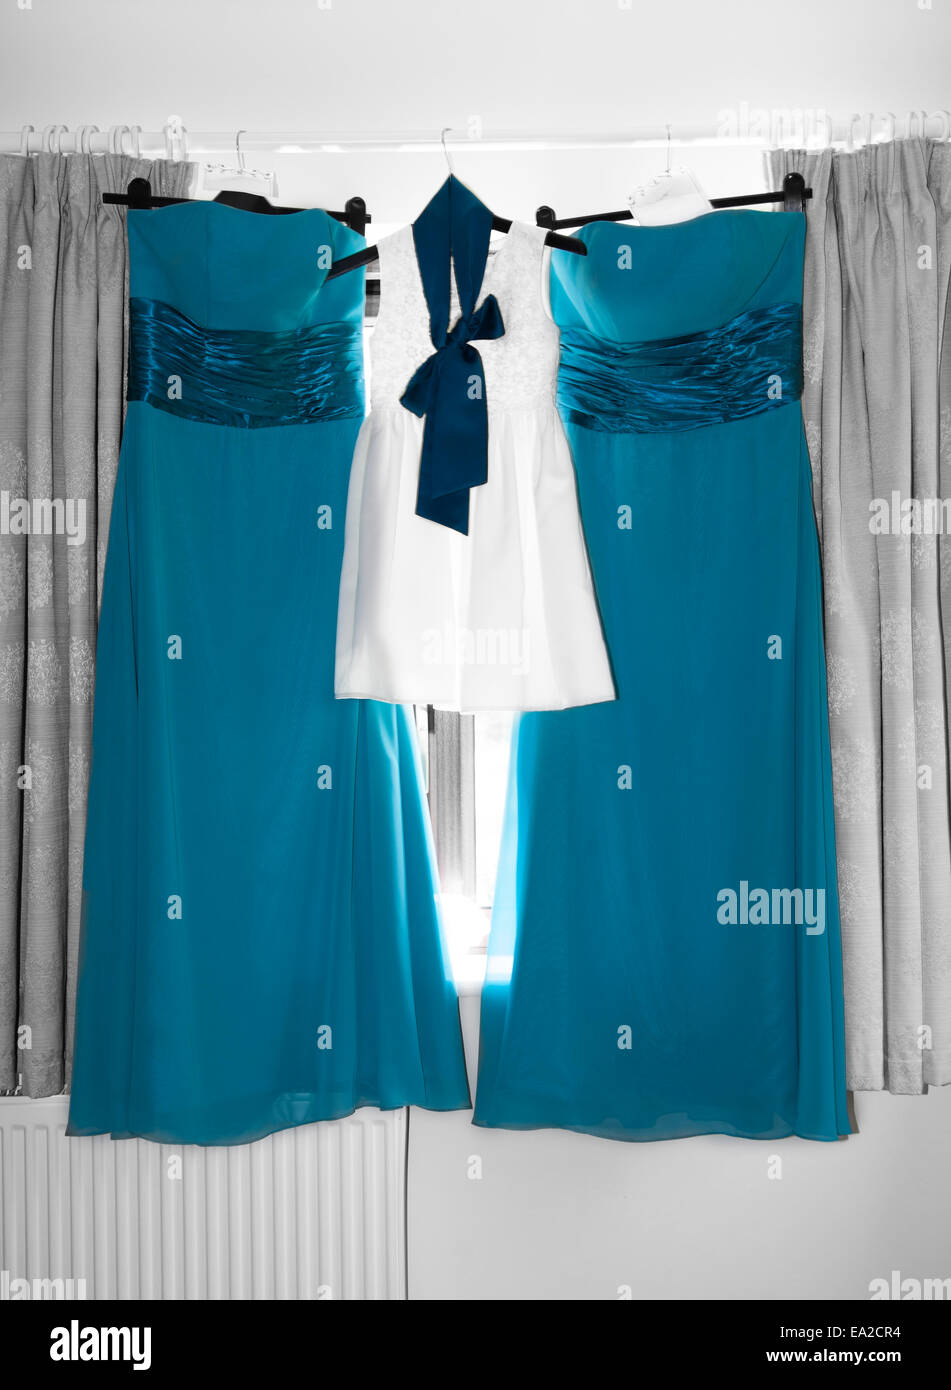 Peacock blue bridesmaids dresses hanging on a rail, waiting to be worn  Stock Photo - Alamy